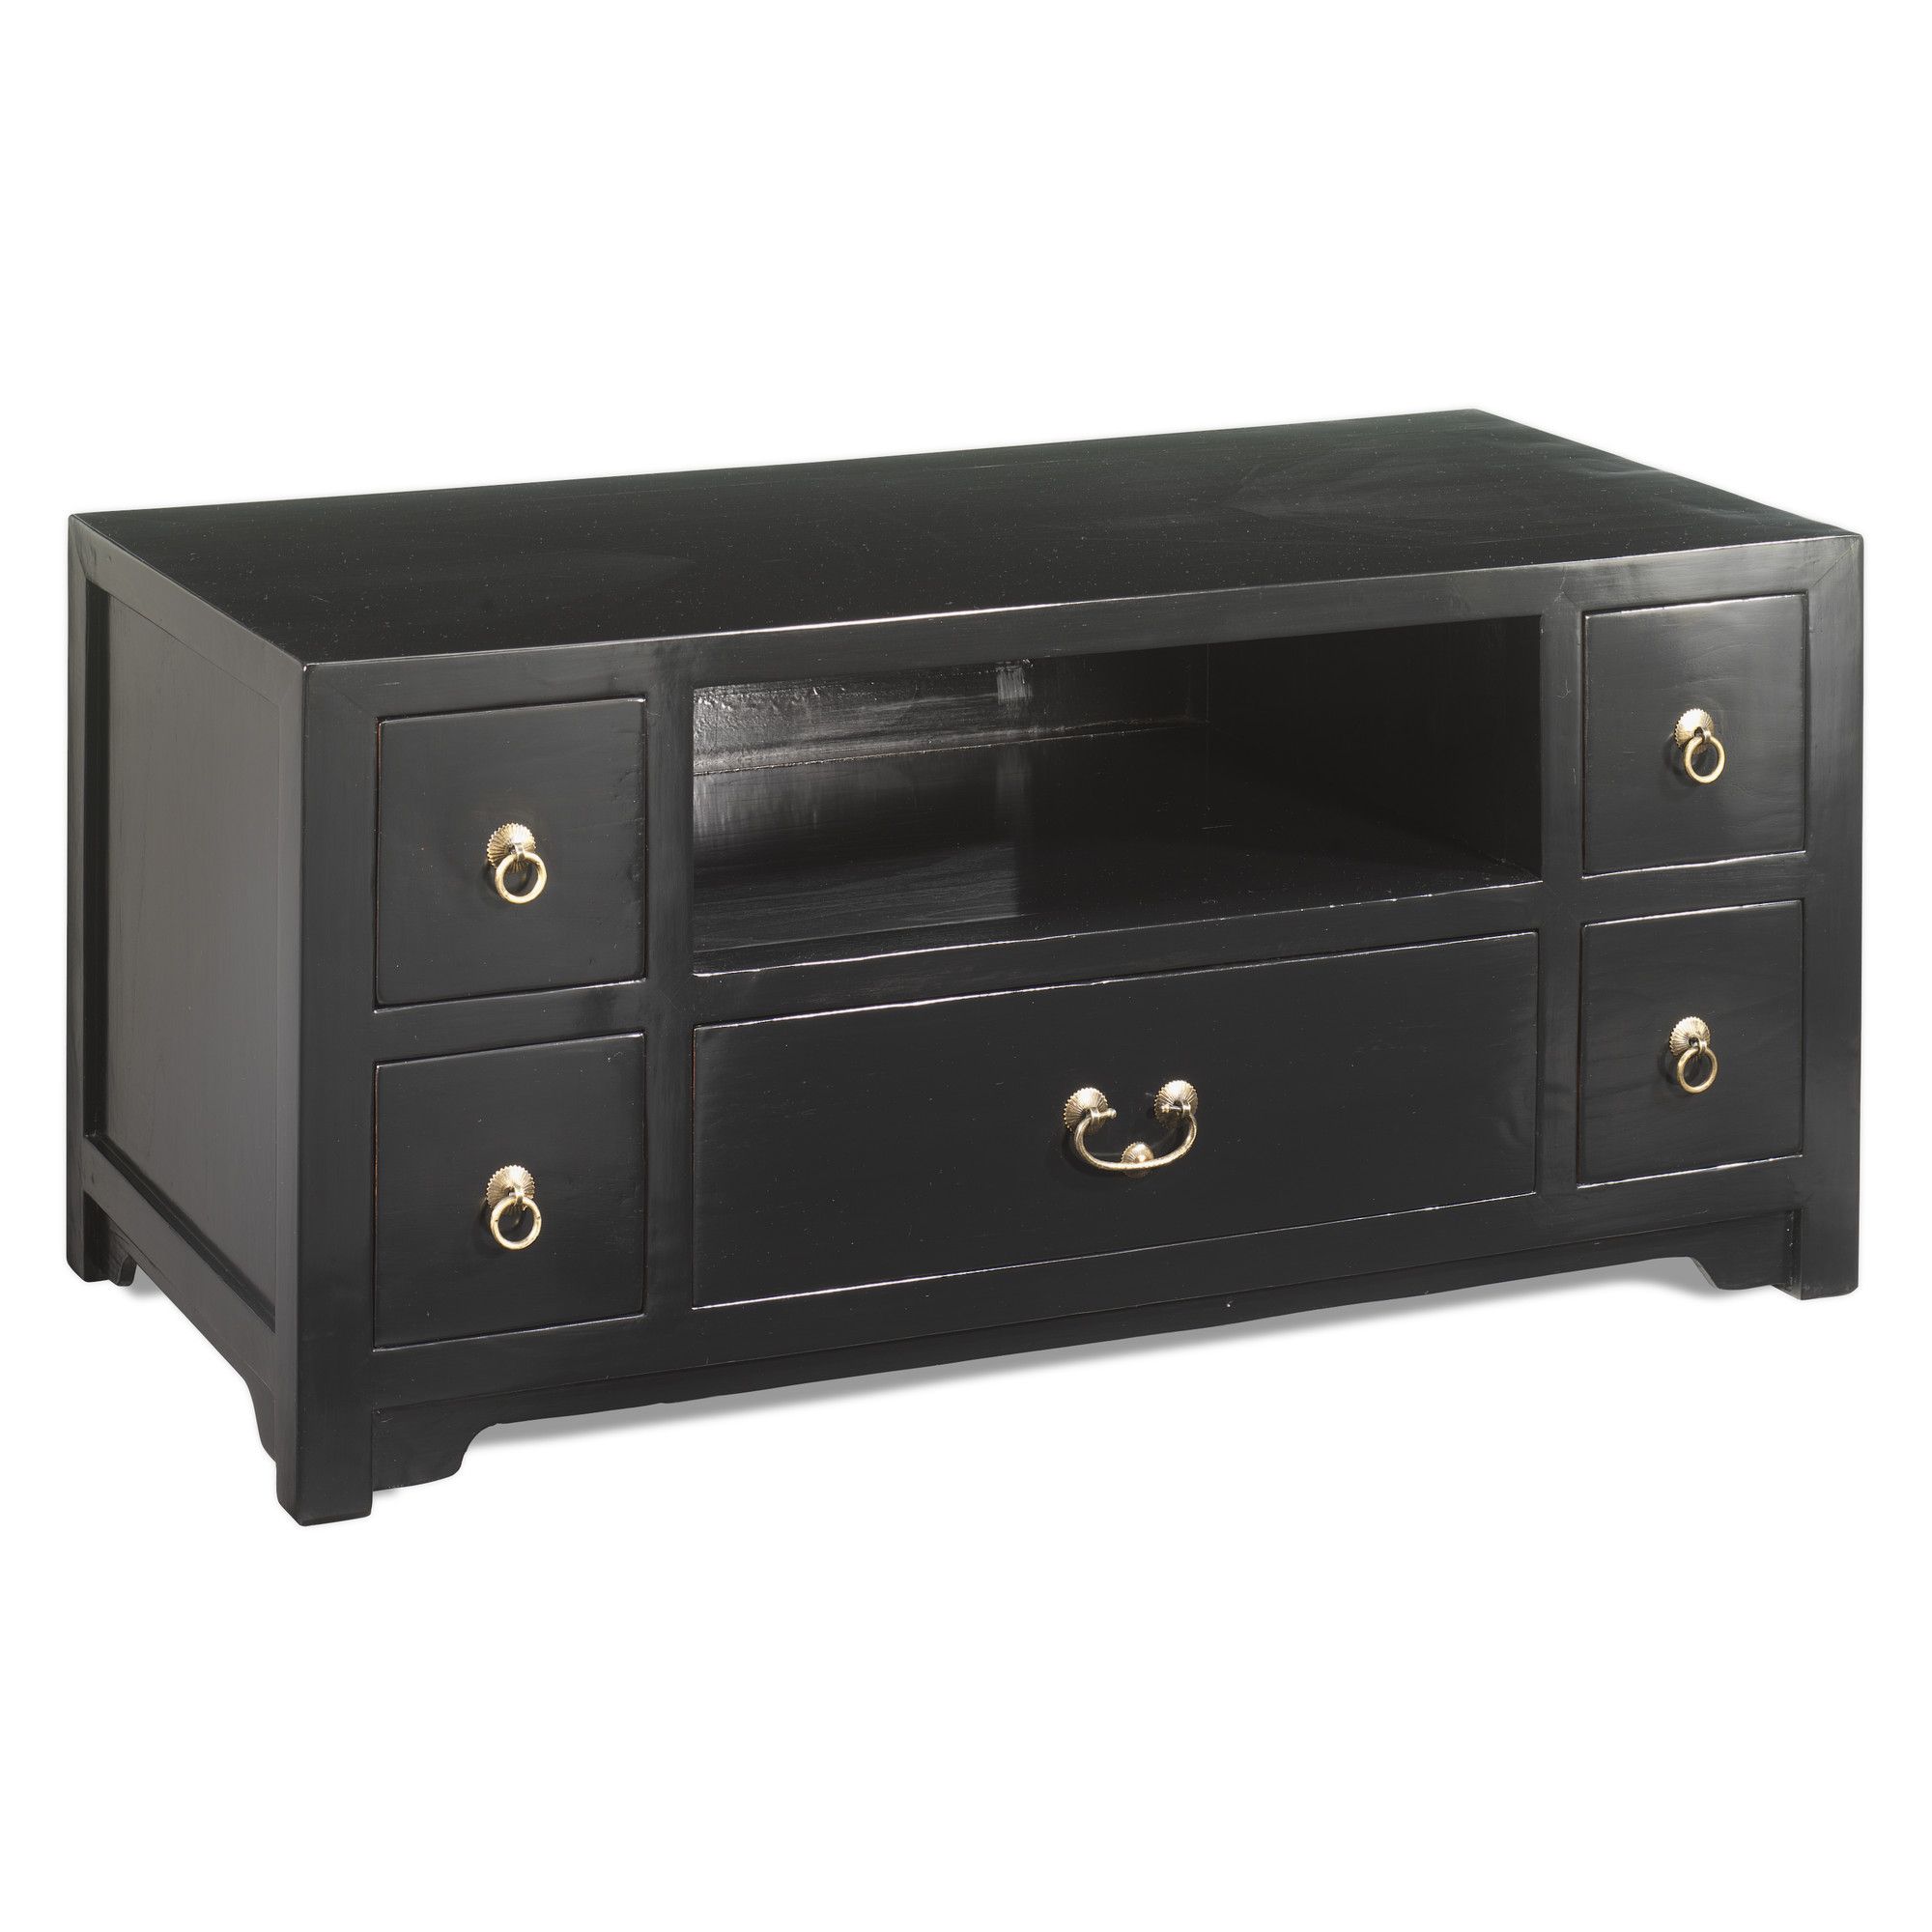 Shimu Chinese Classical Low Kang TV Unit - Black Lacquer at Tescos Direct